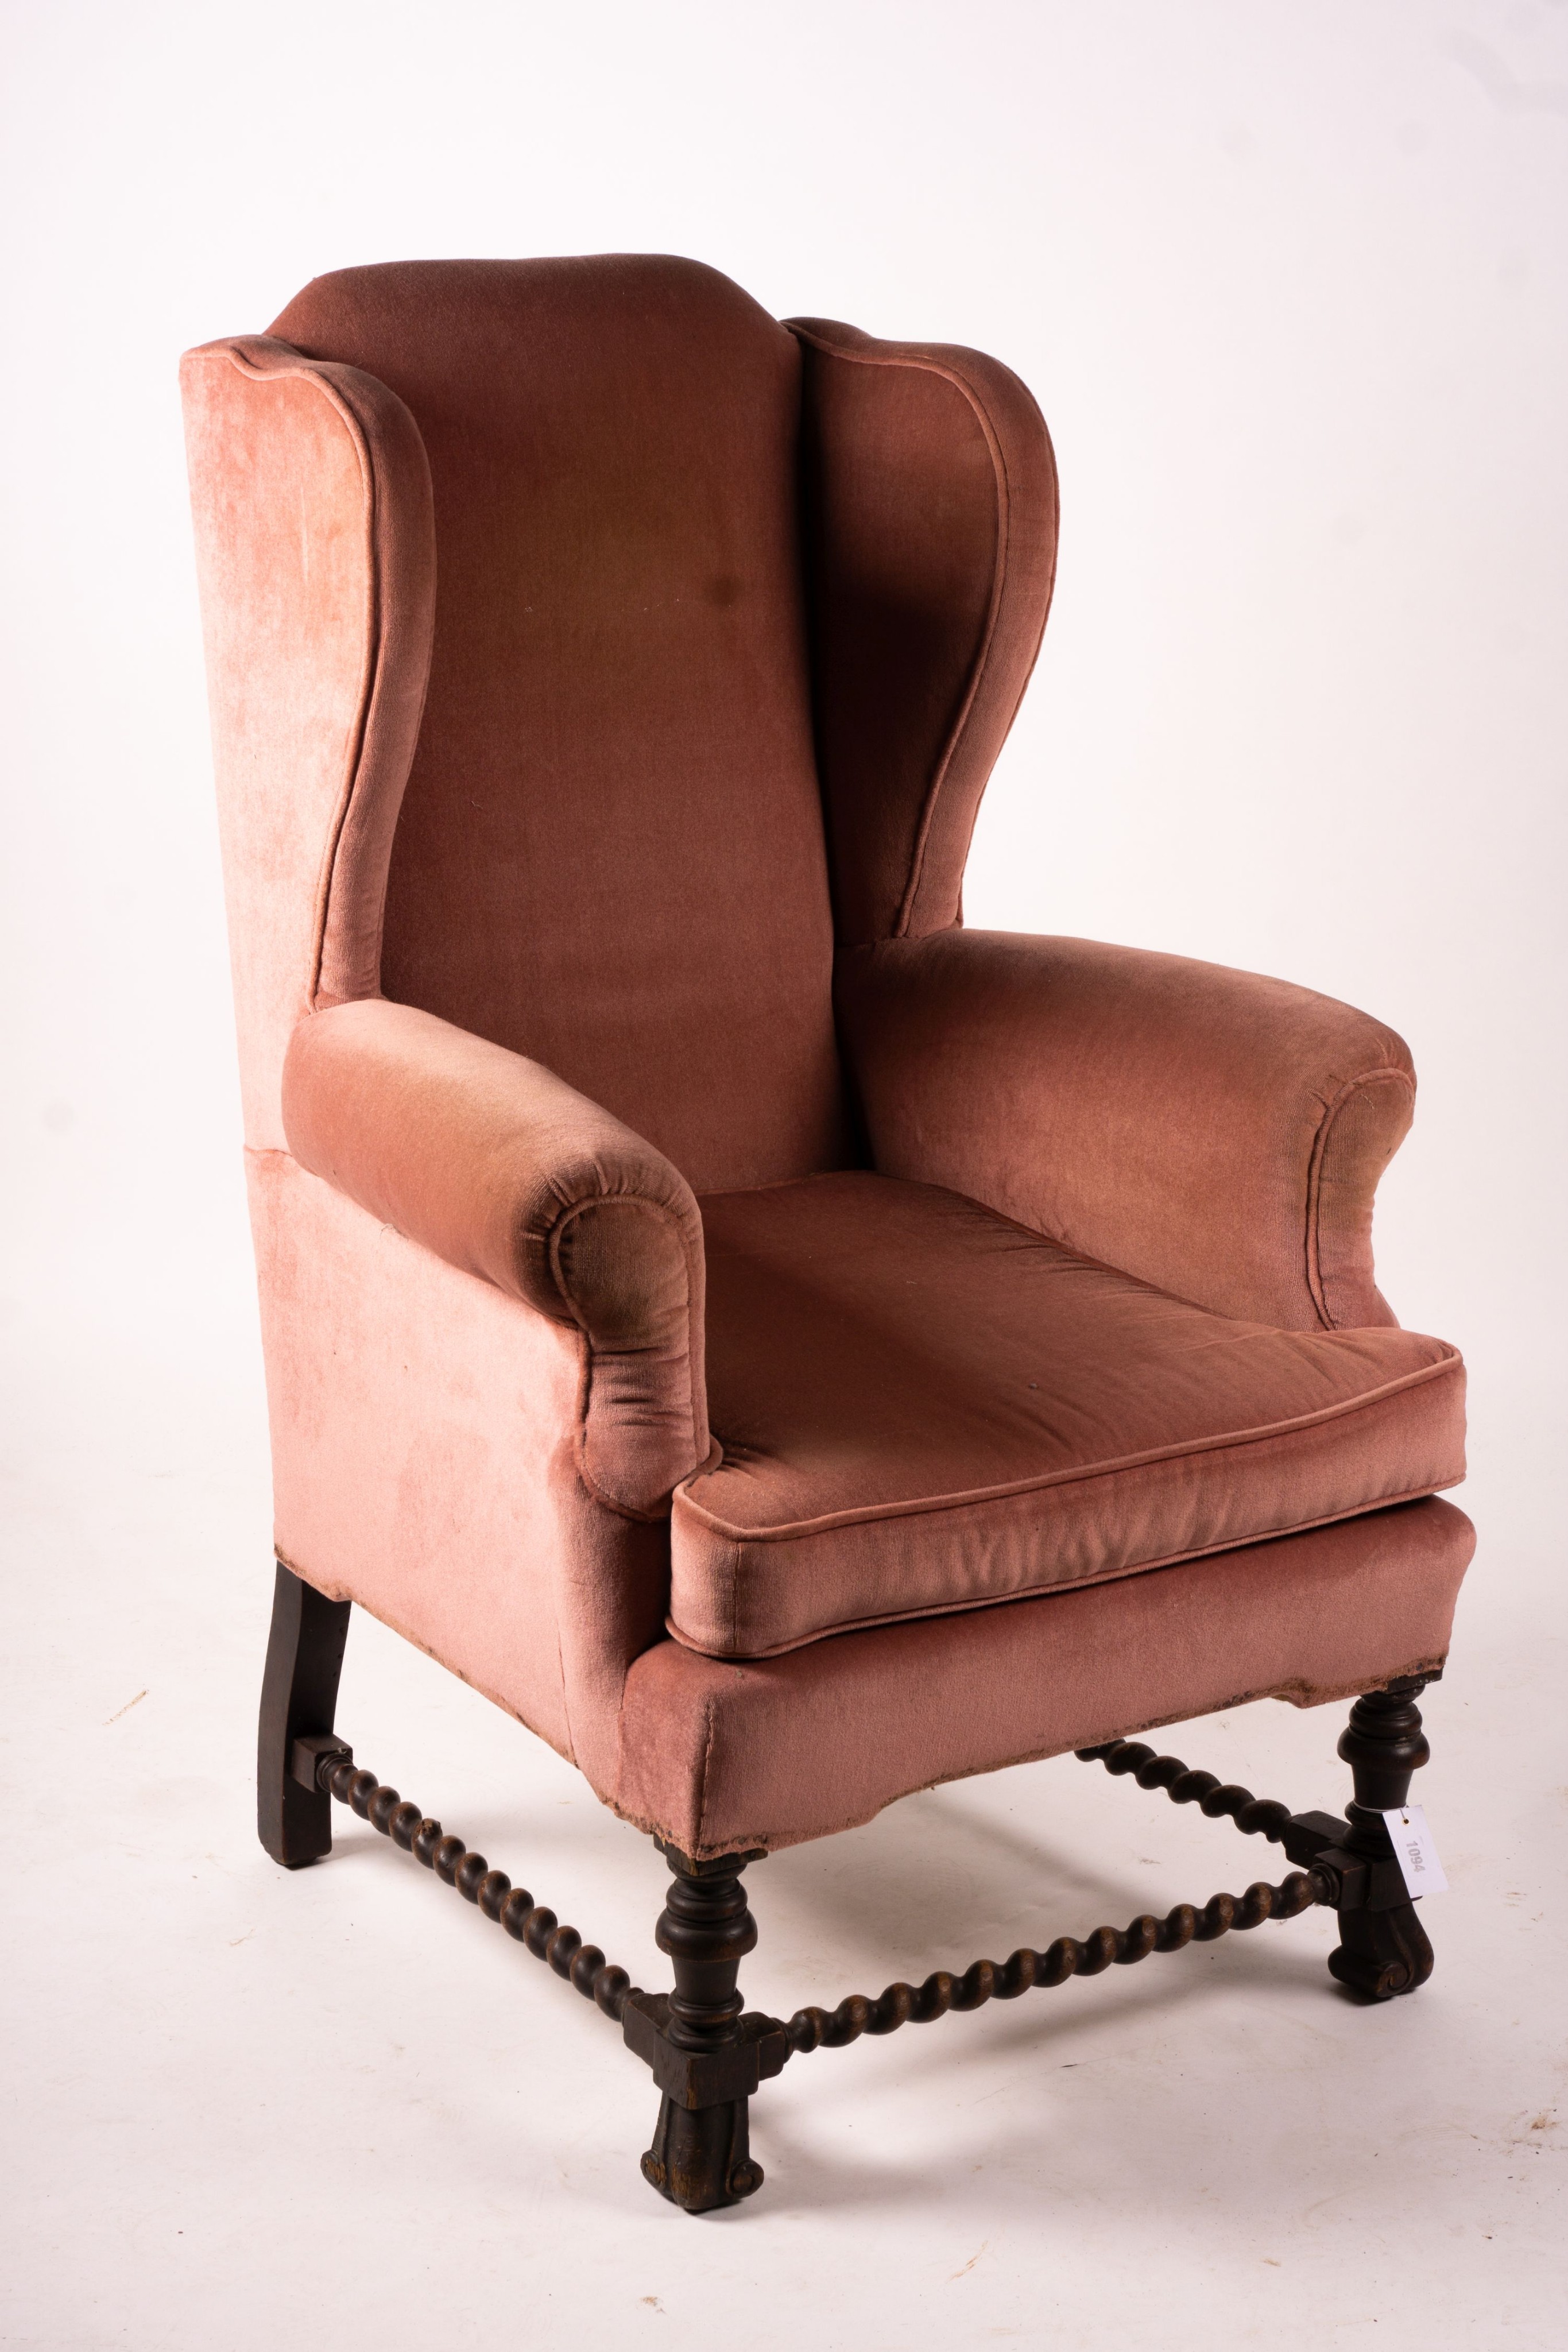 An early 20th century Jacobean revival upholstered wing armchair, width 84cm, depth 90cm, height 128cm